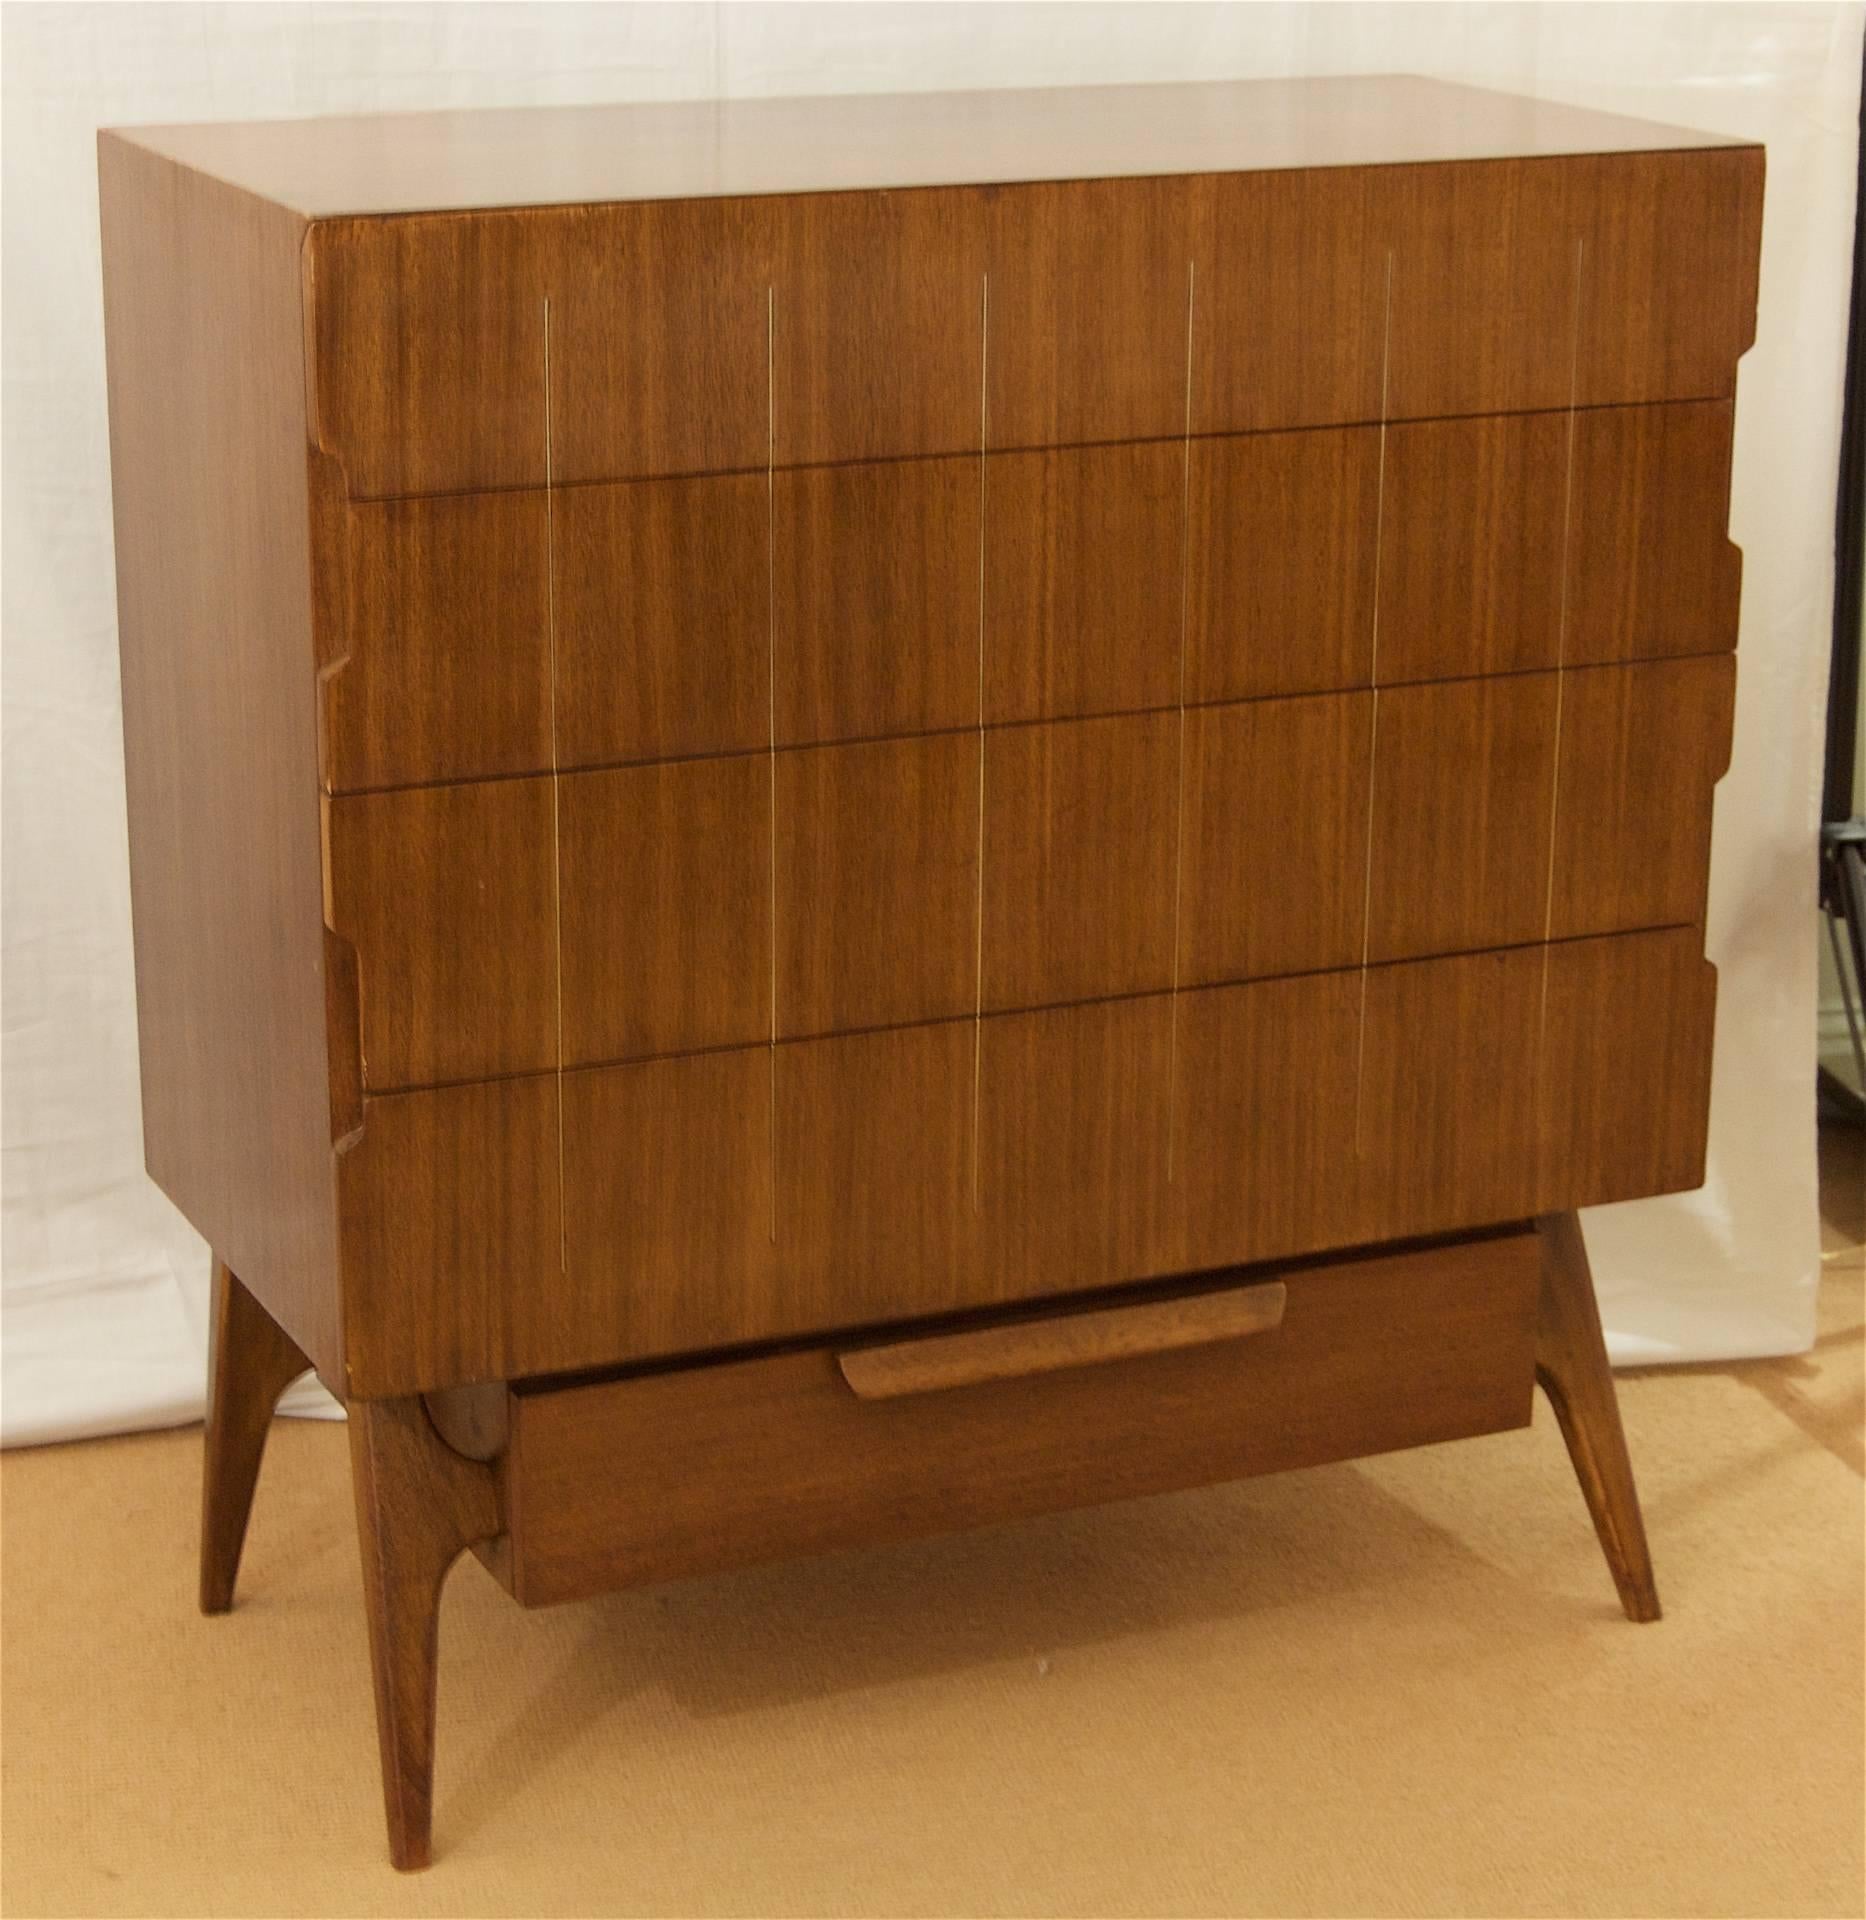 Gorgeous walnut chest of drawers with brass inlay detailing on a splay leg base.
Each drawer has a cut-out detailing on the edges which serves as drawer handles, giving this piece interesting lines.

The lowest drawer features a cedar bottom for